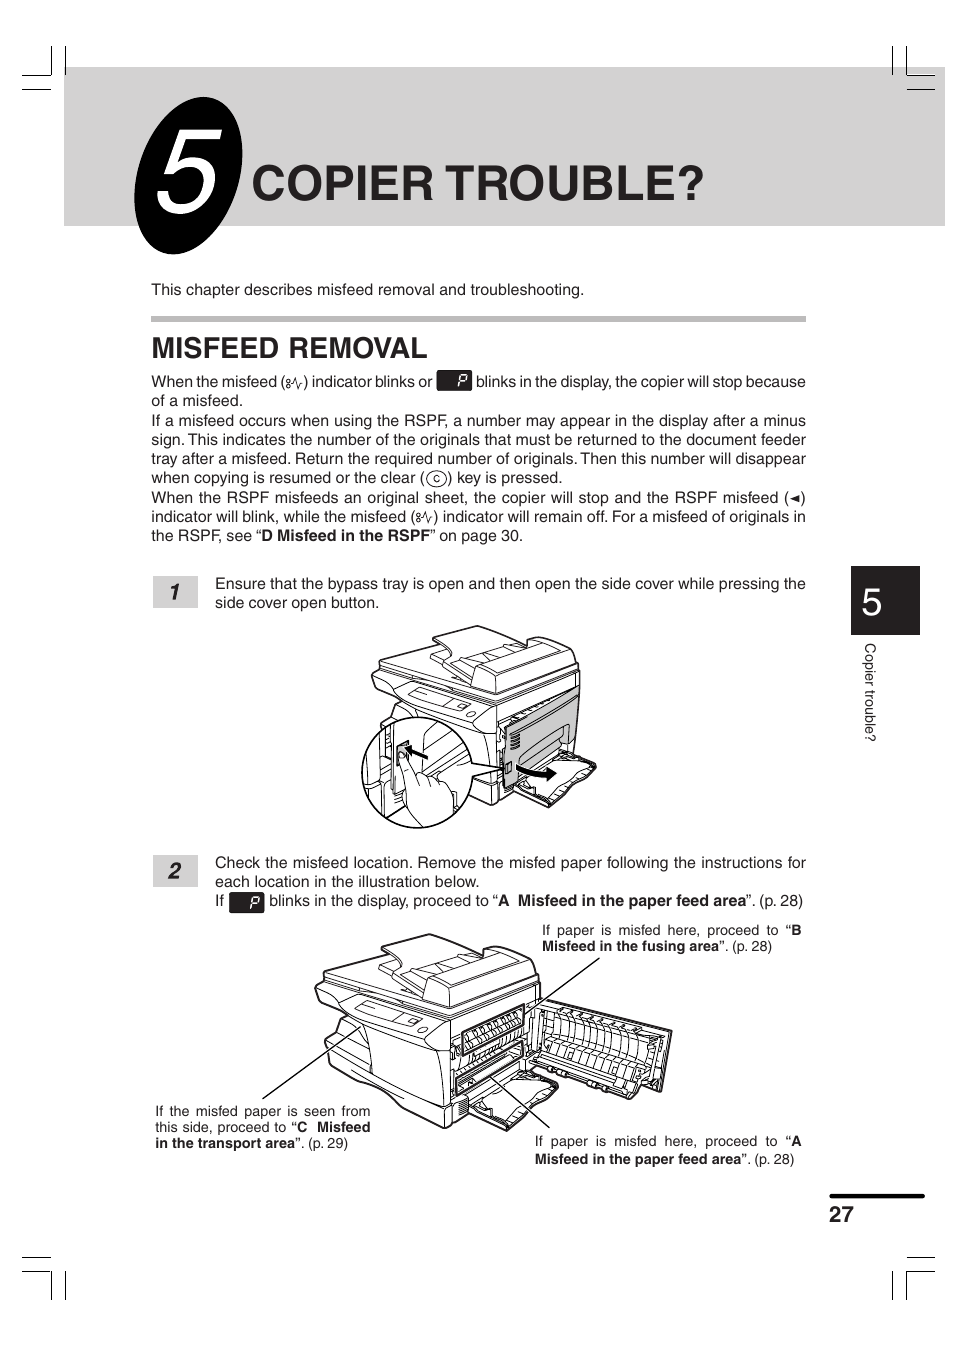 Copier trouble, Misfeed removal | Sharp AR-156 User Manual | Page 29 / 52